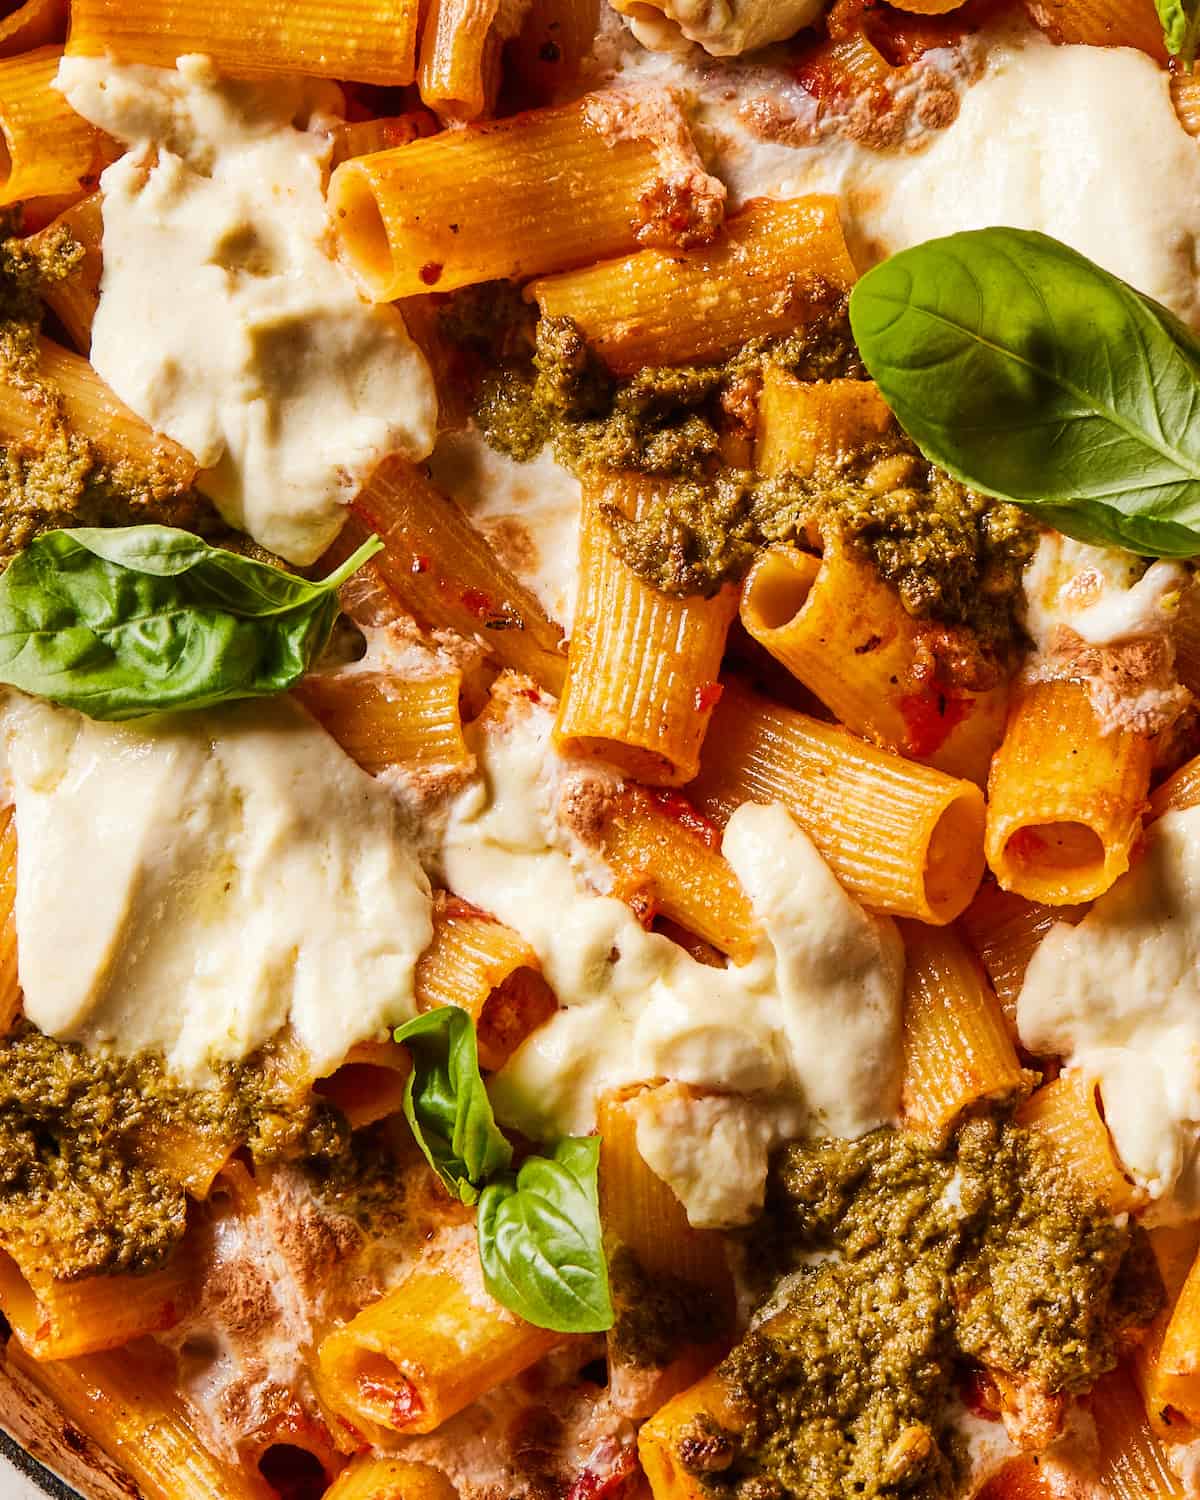 A closeup shot of baked rigatoni with ground chicken sausage, pesto and ricotta garnished with basil leaves.